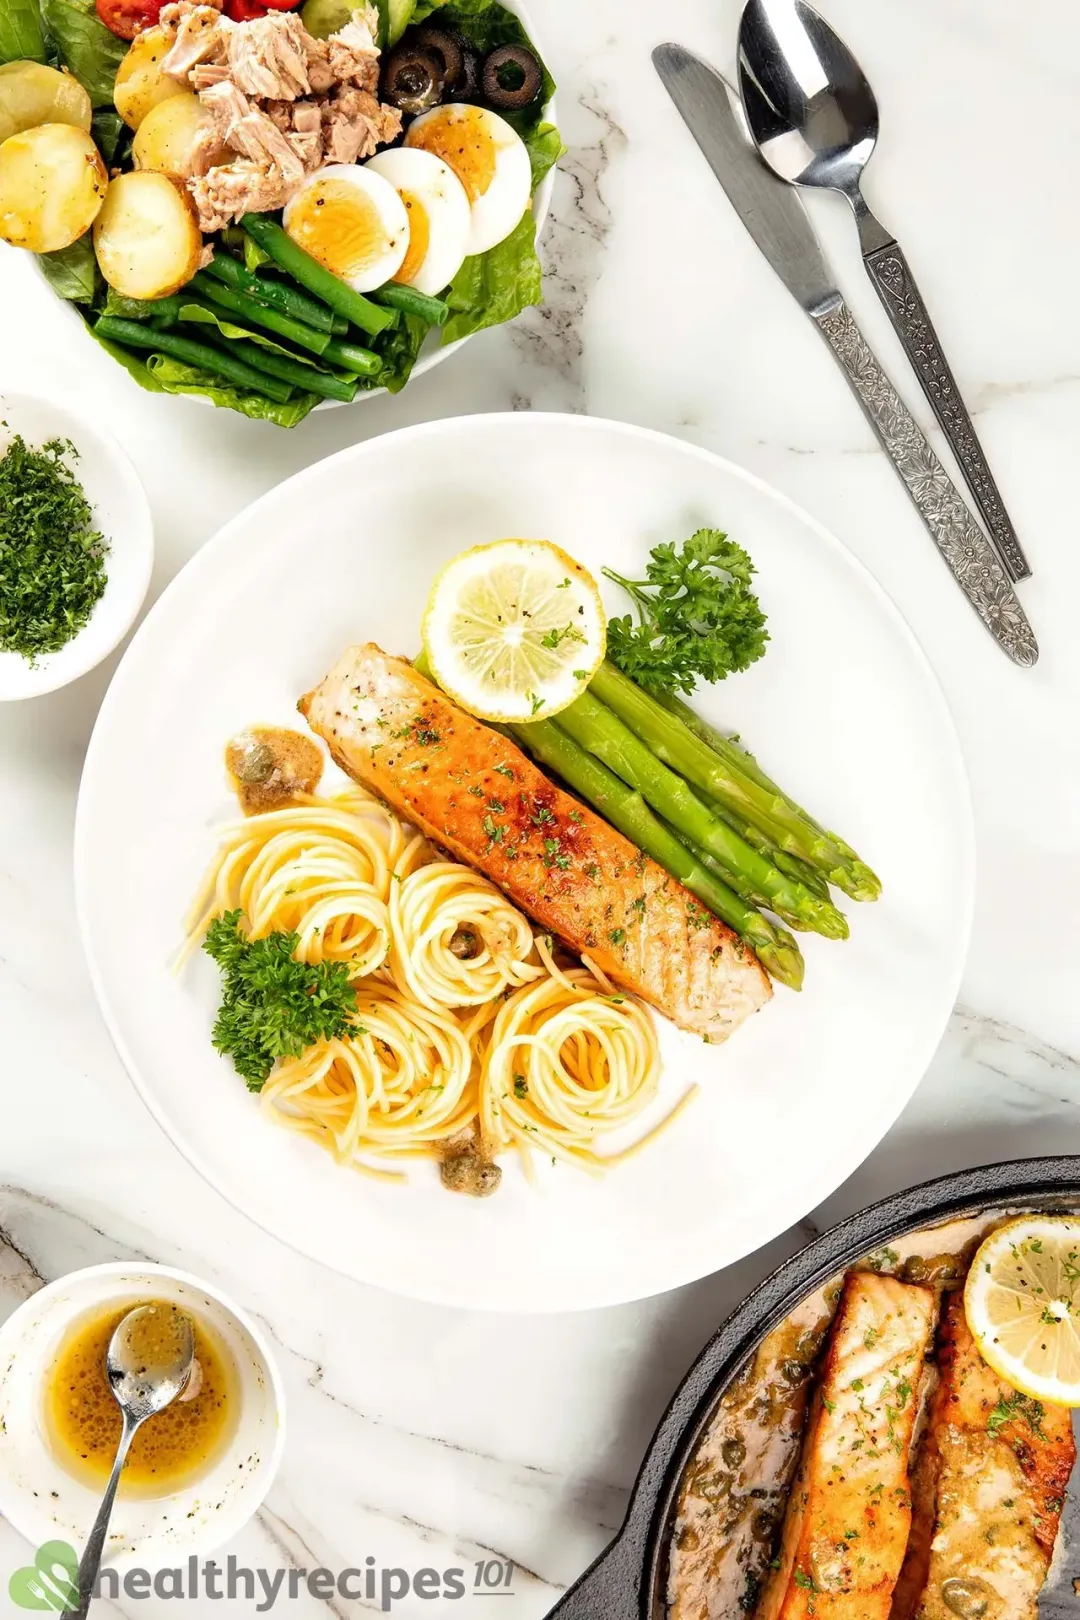 A plate of seared salmon served with cooked pasta and asparagus and topped with a lemon slice and parsley; the surroundings are a smaller plate of salad, a knife, a spoon, two small bowls of sauce and parsley, and two salmon filets in a skillet.